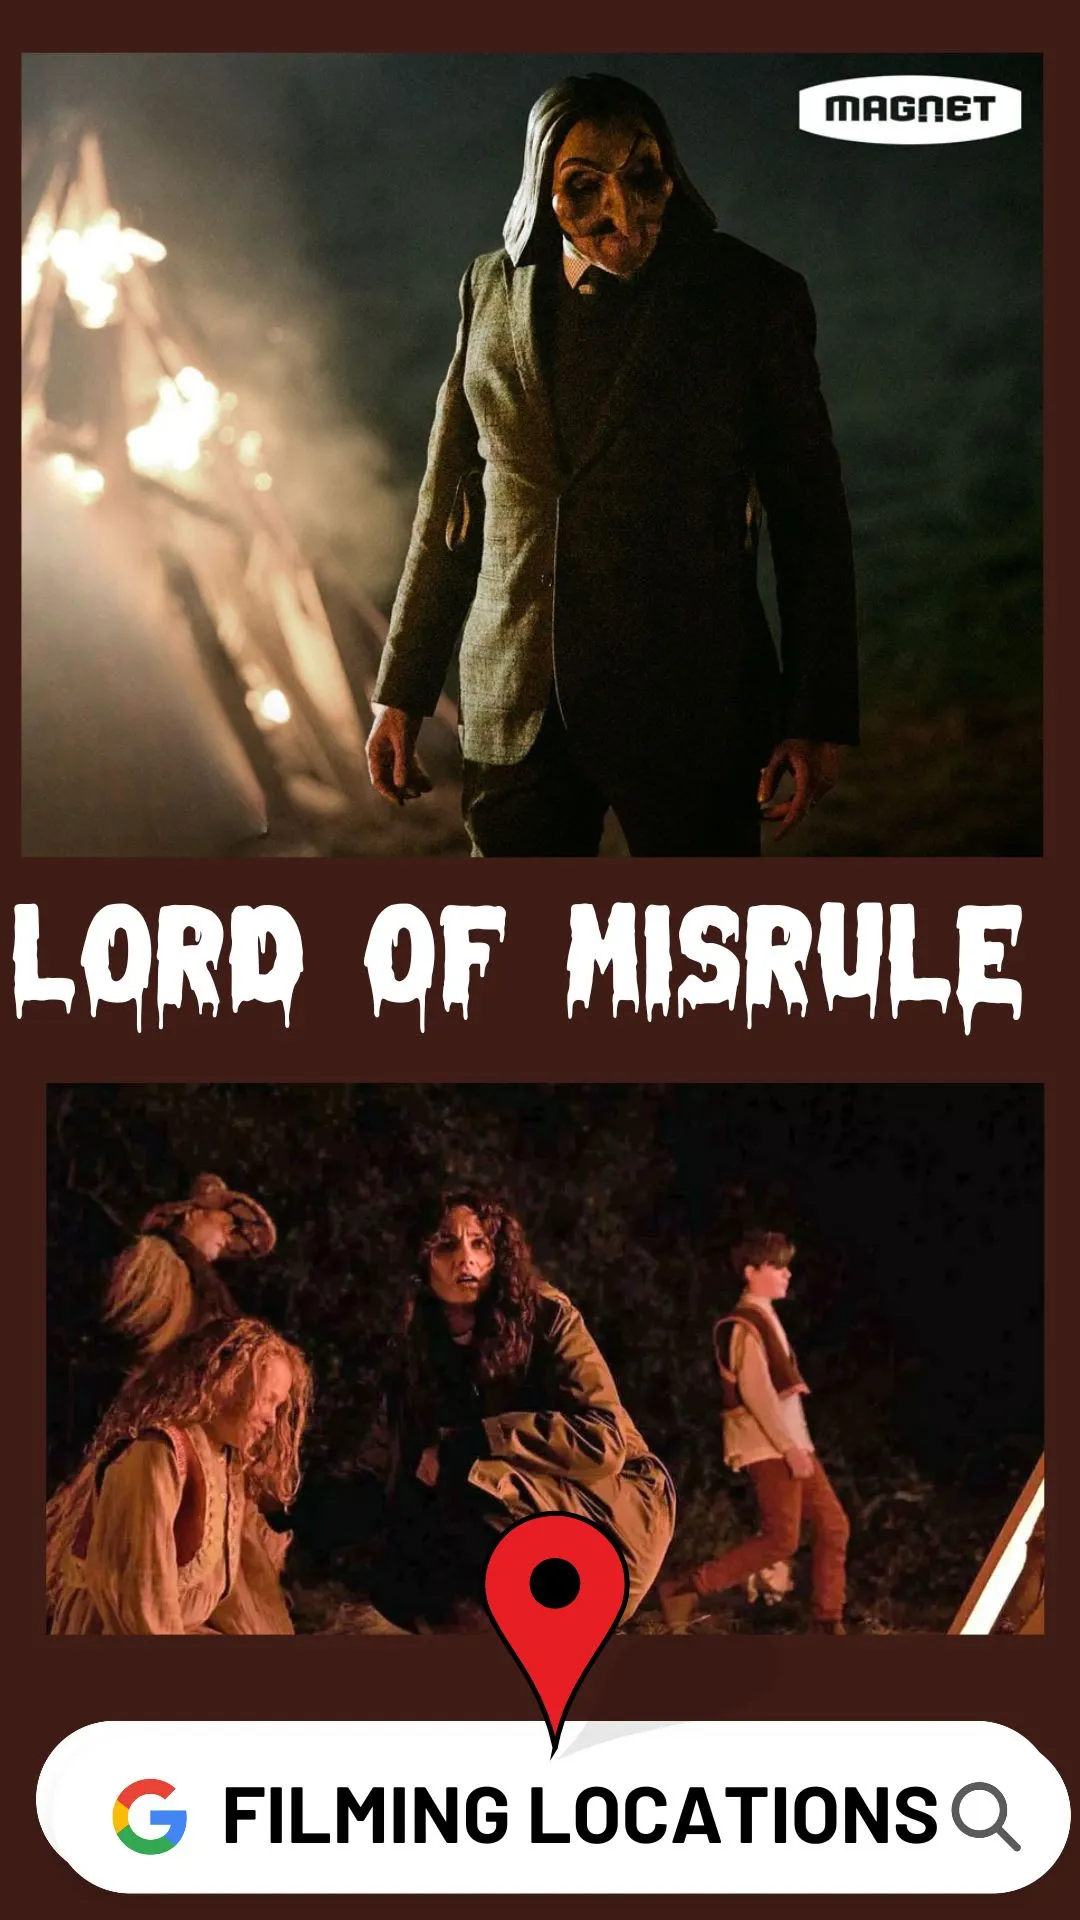 Lord of Misrule Filming Locations